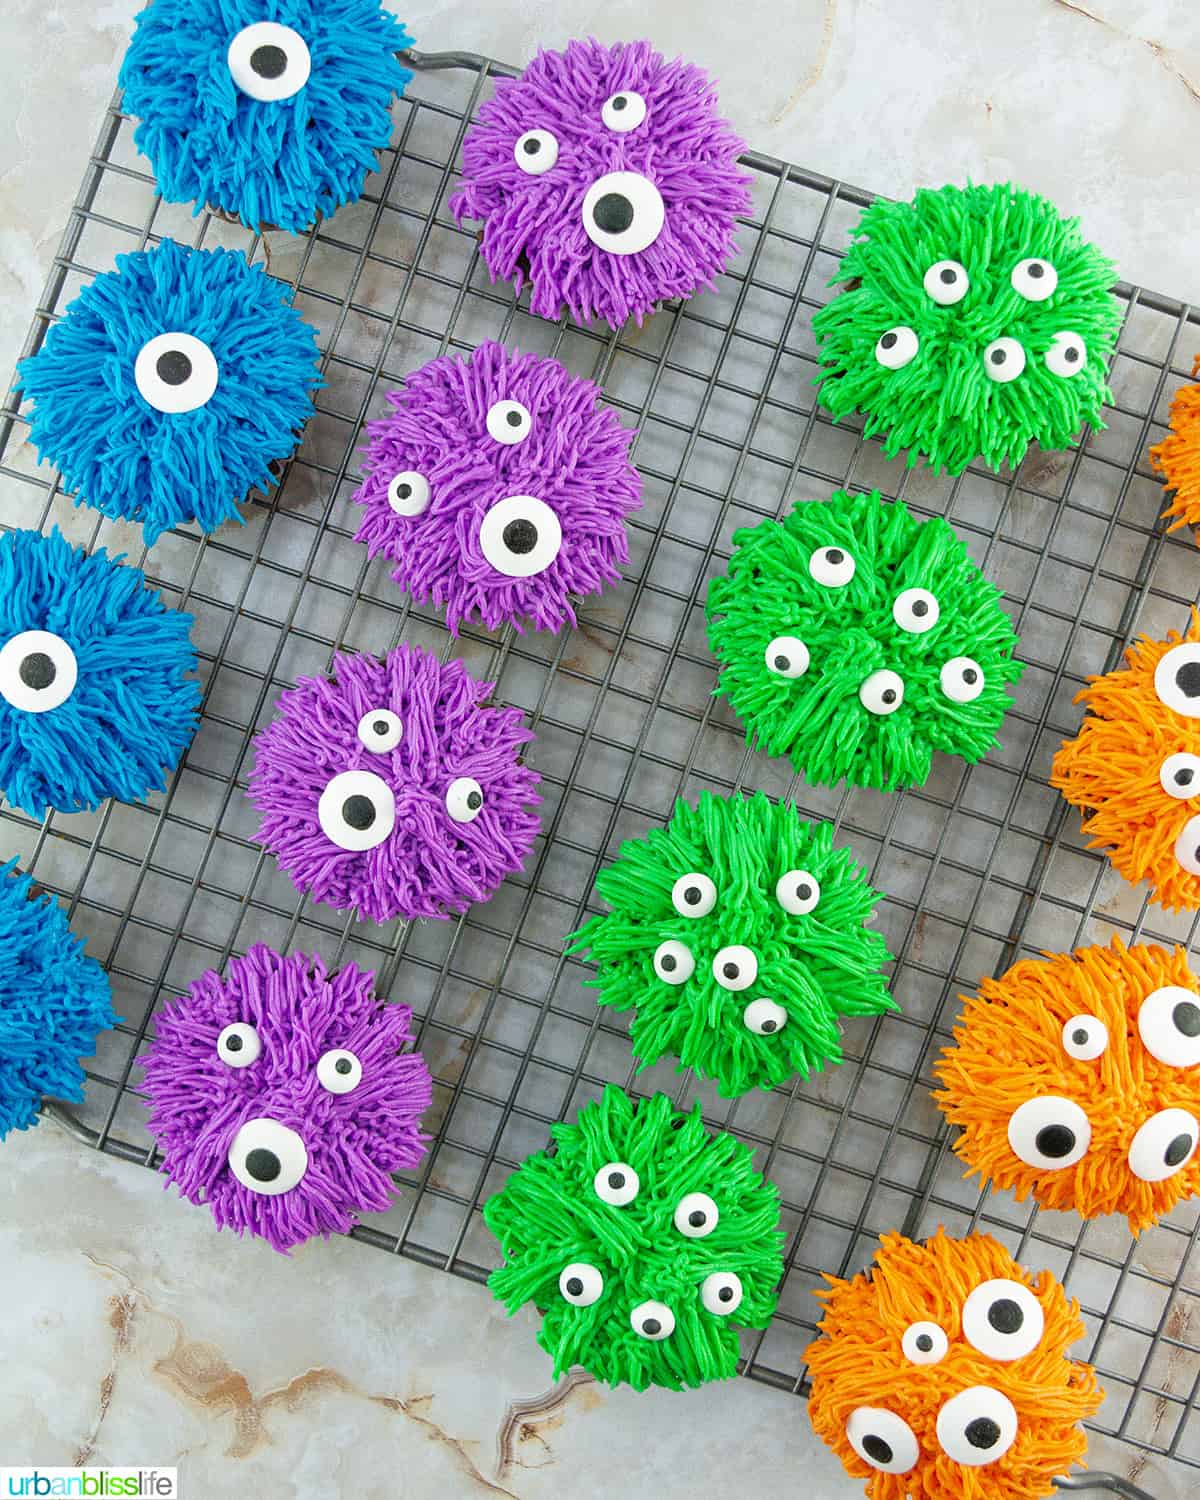 several colorful bright halloween monster cupcakes on a wire rack.